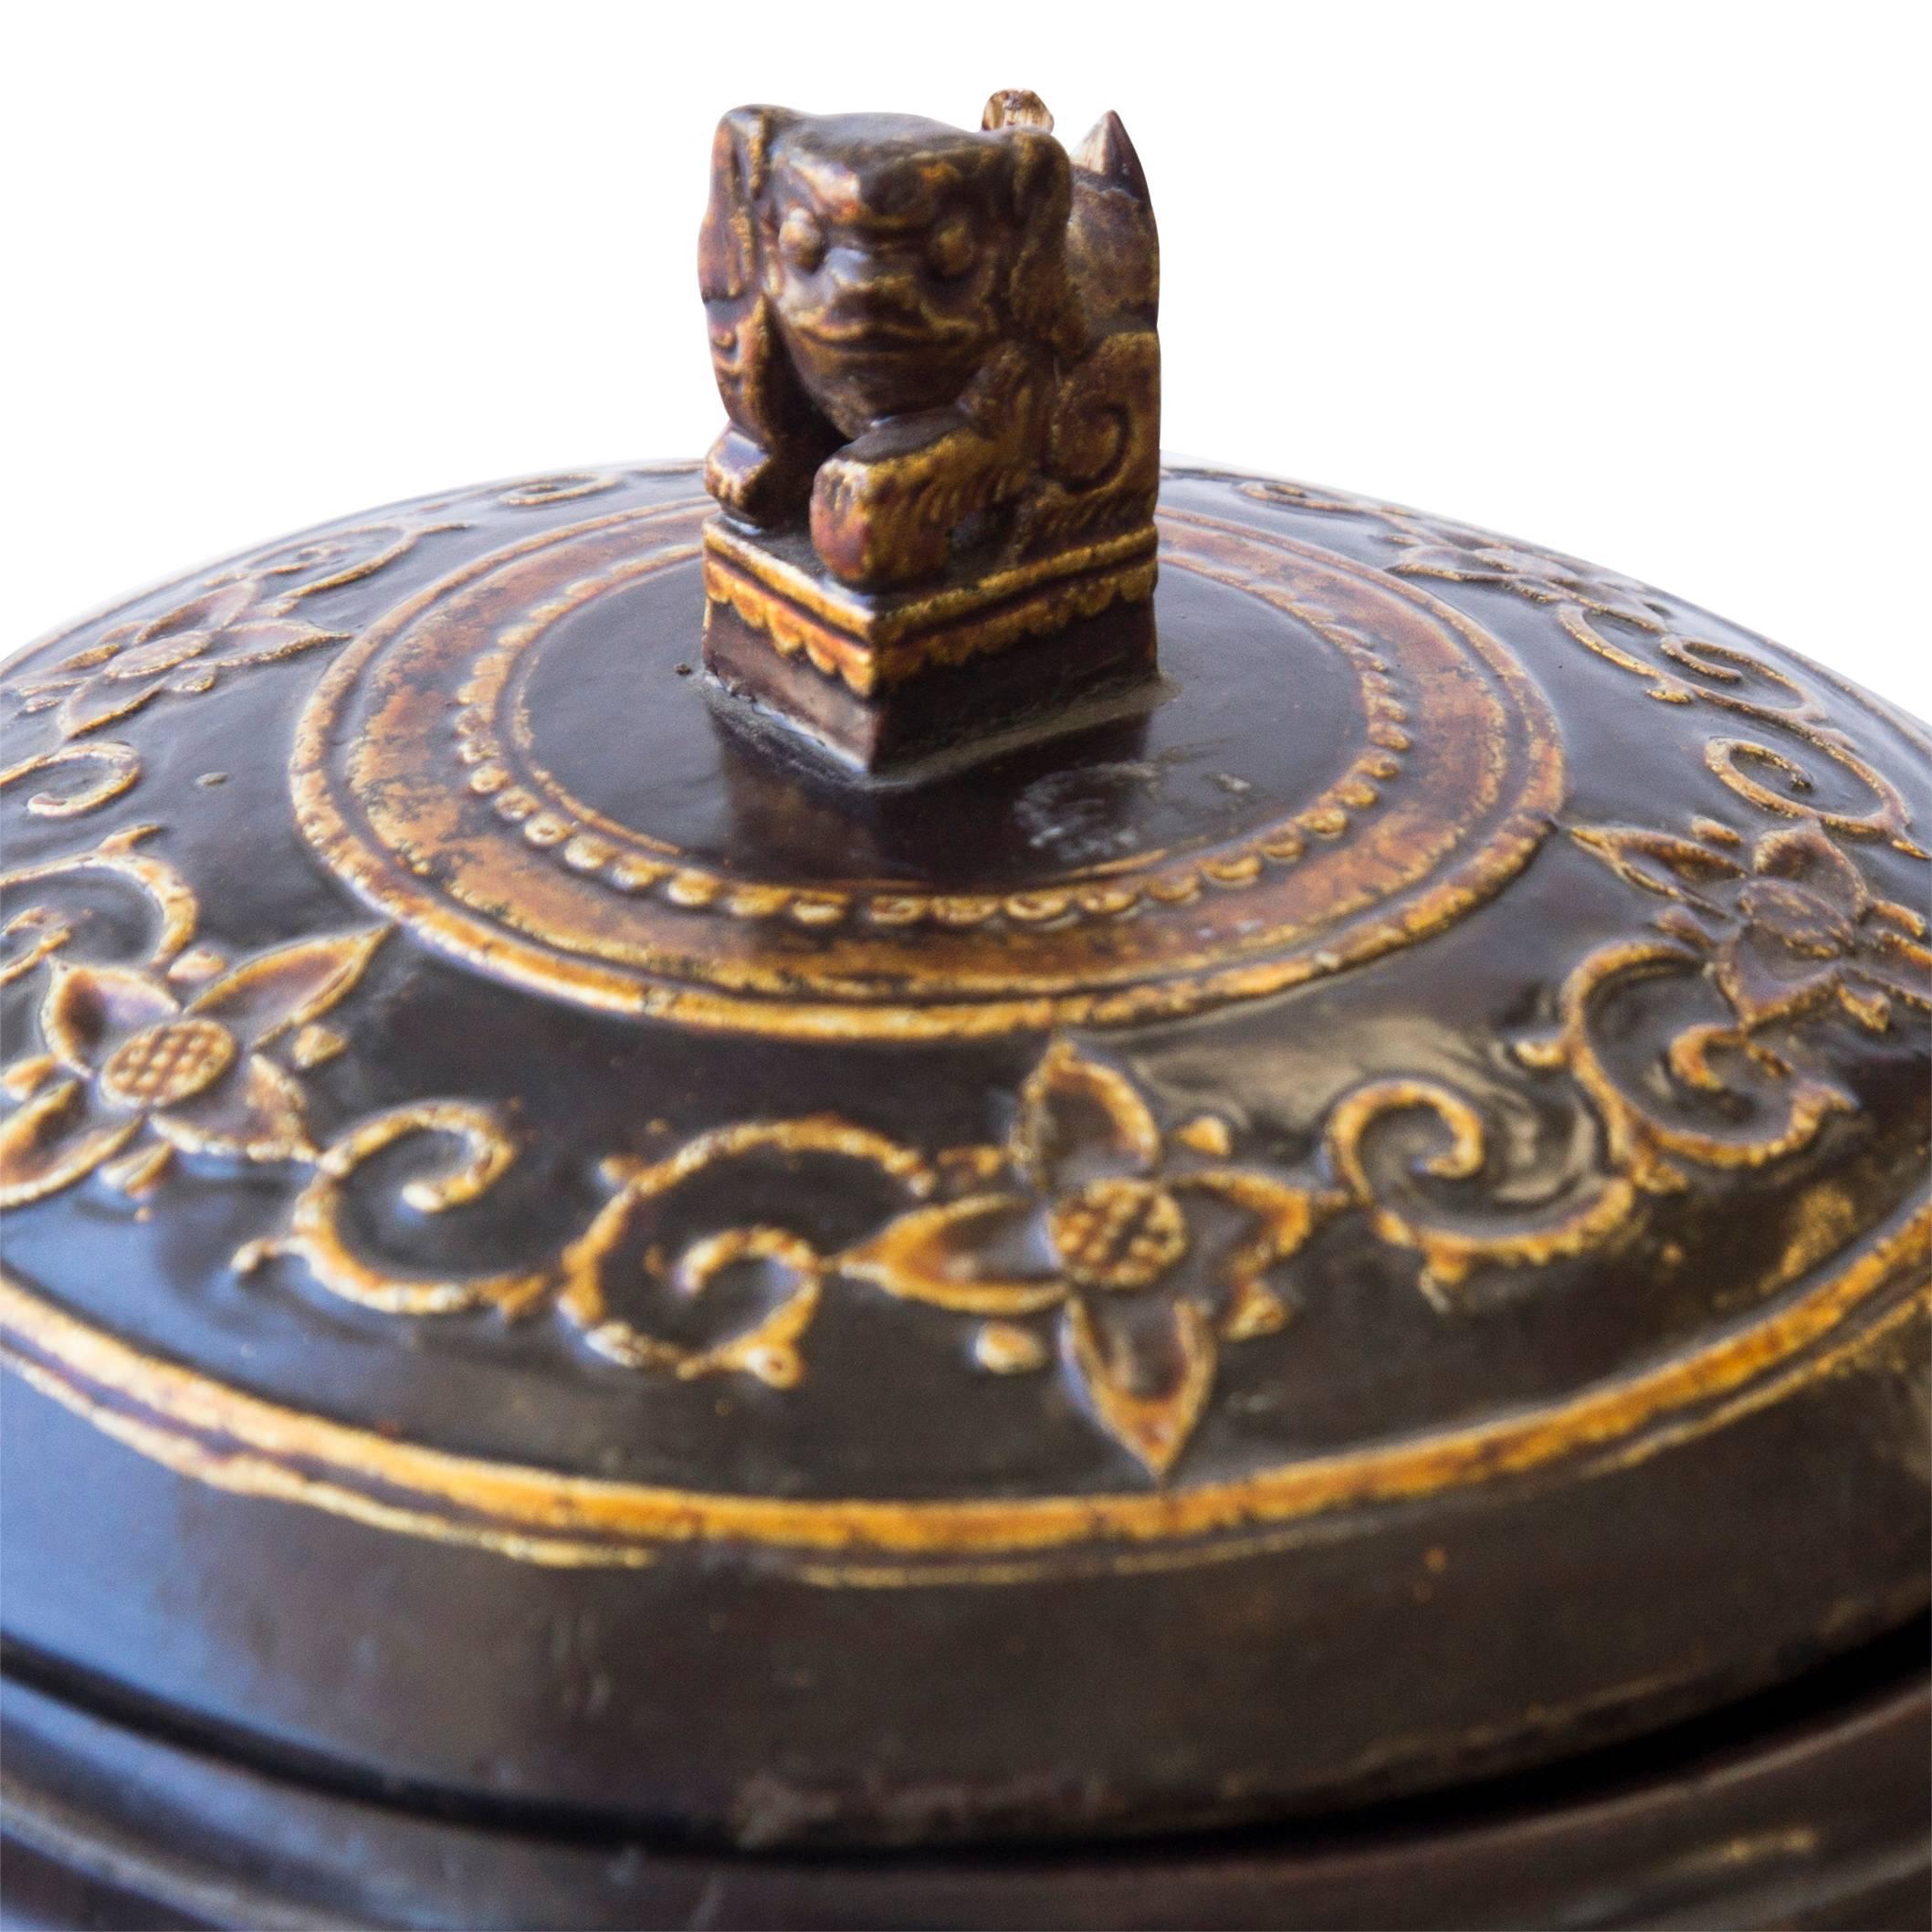 Handmade 19th century fluted round wooden container and lid with relief and 